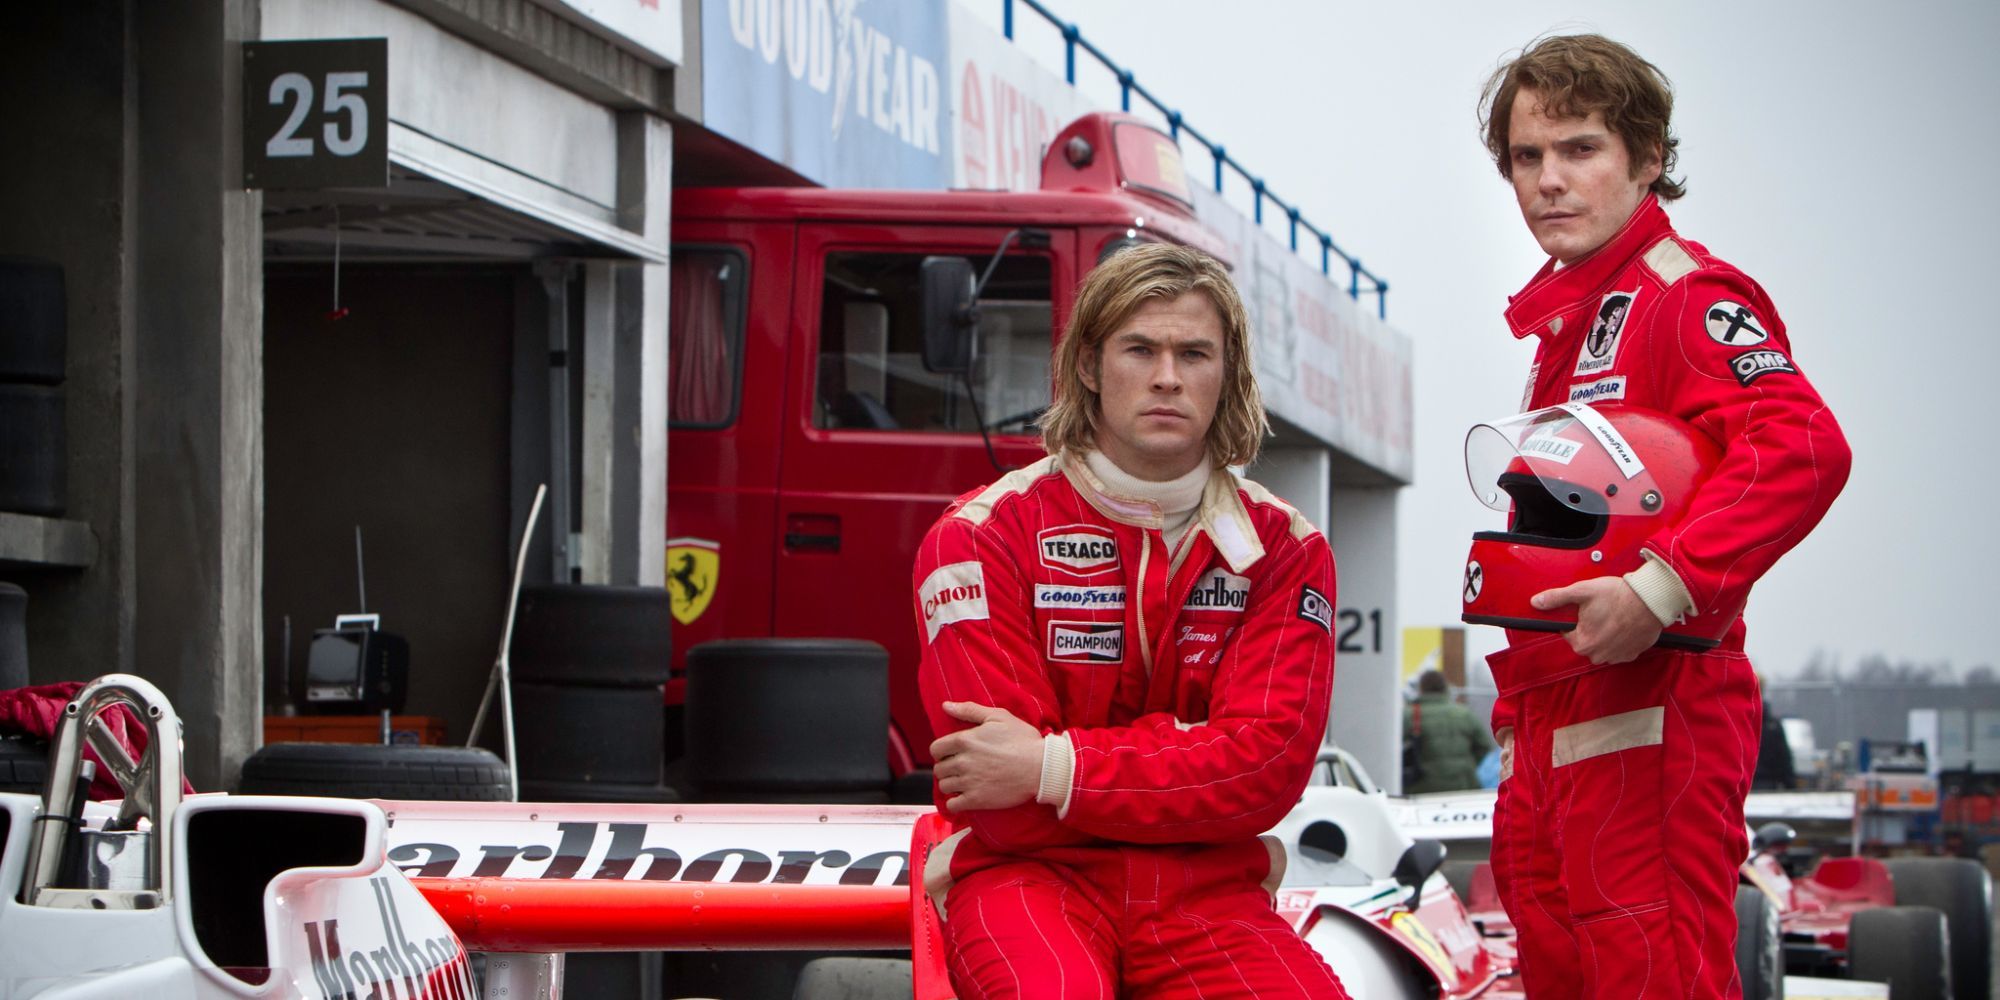 Chris Hemsworth and Daniel Brühl as James Hunt and Niki Lauda posing next to a racing car and looking directly to the camera in the film Rush